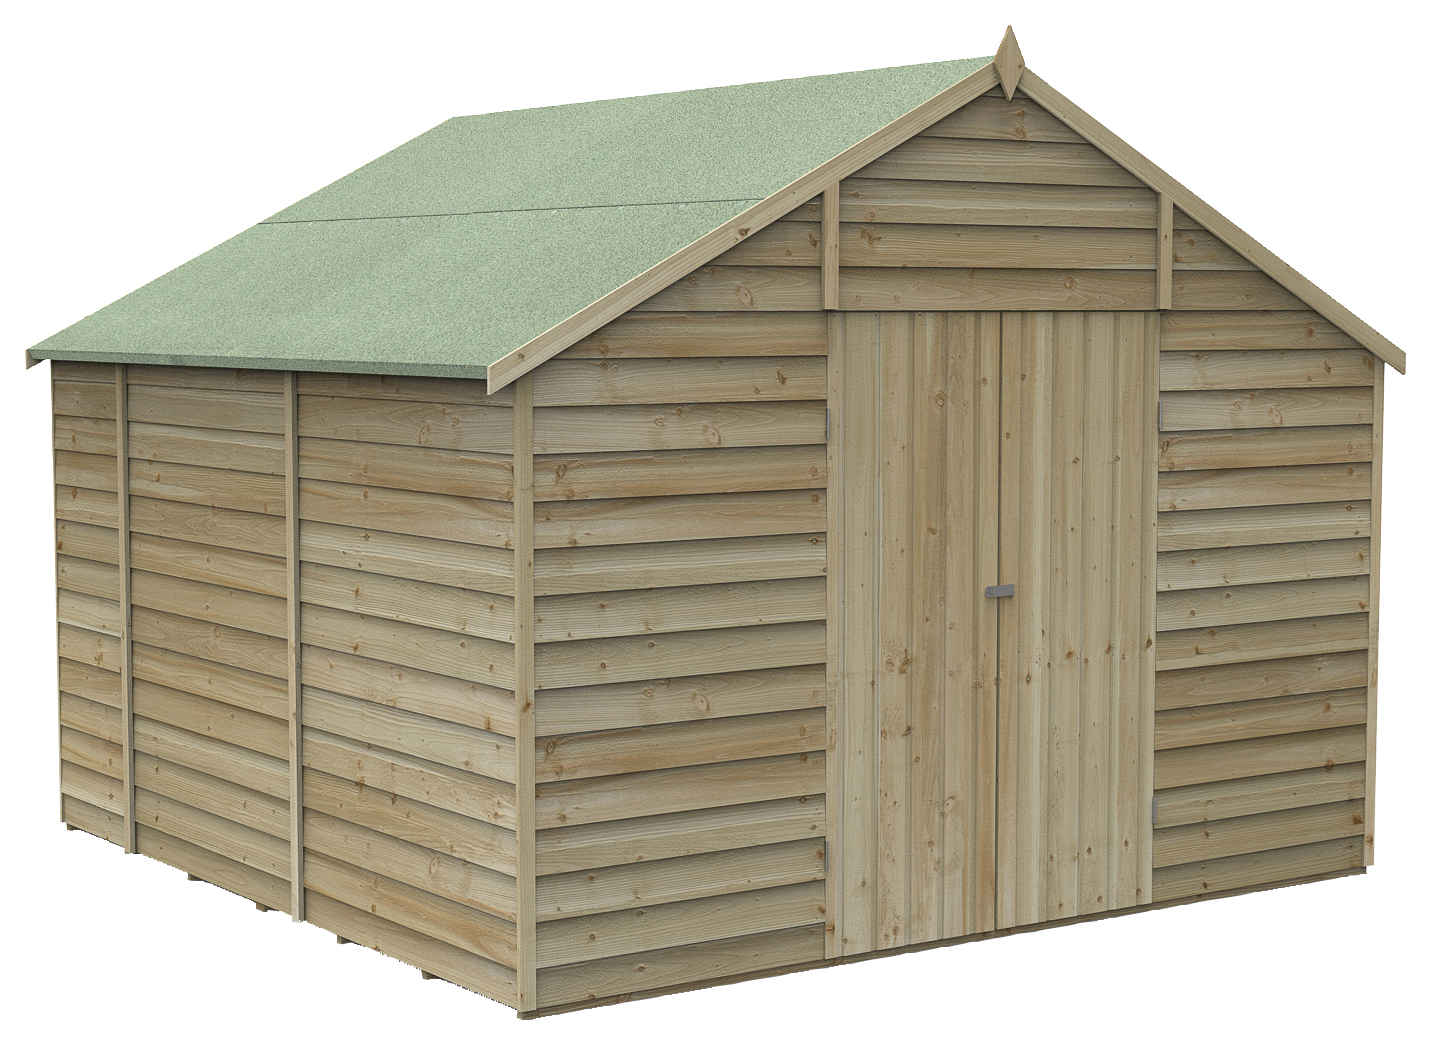 Forest Garden 10 x 10ft 4Life Apex Overlap Pressure Treated Double Door Windowless Shed with Base and Assembly